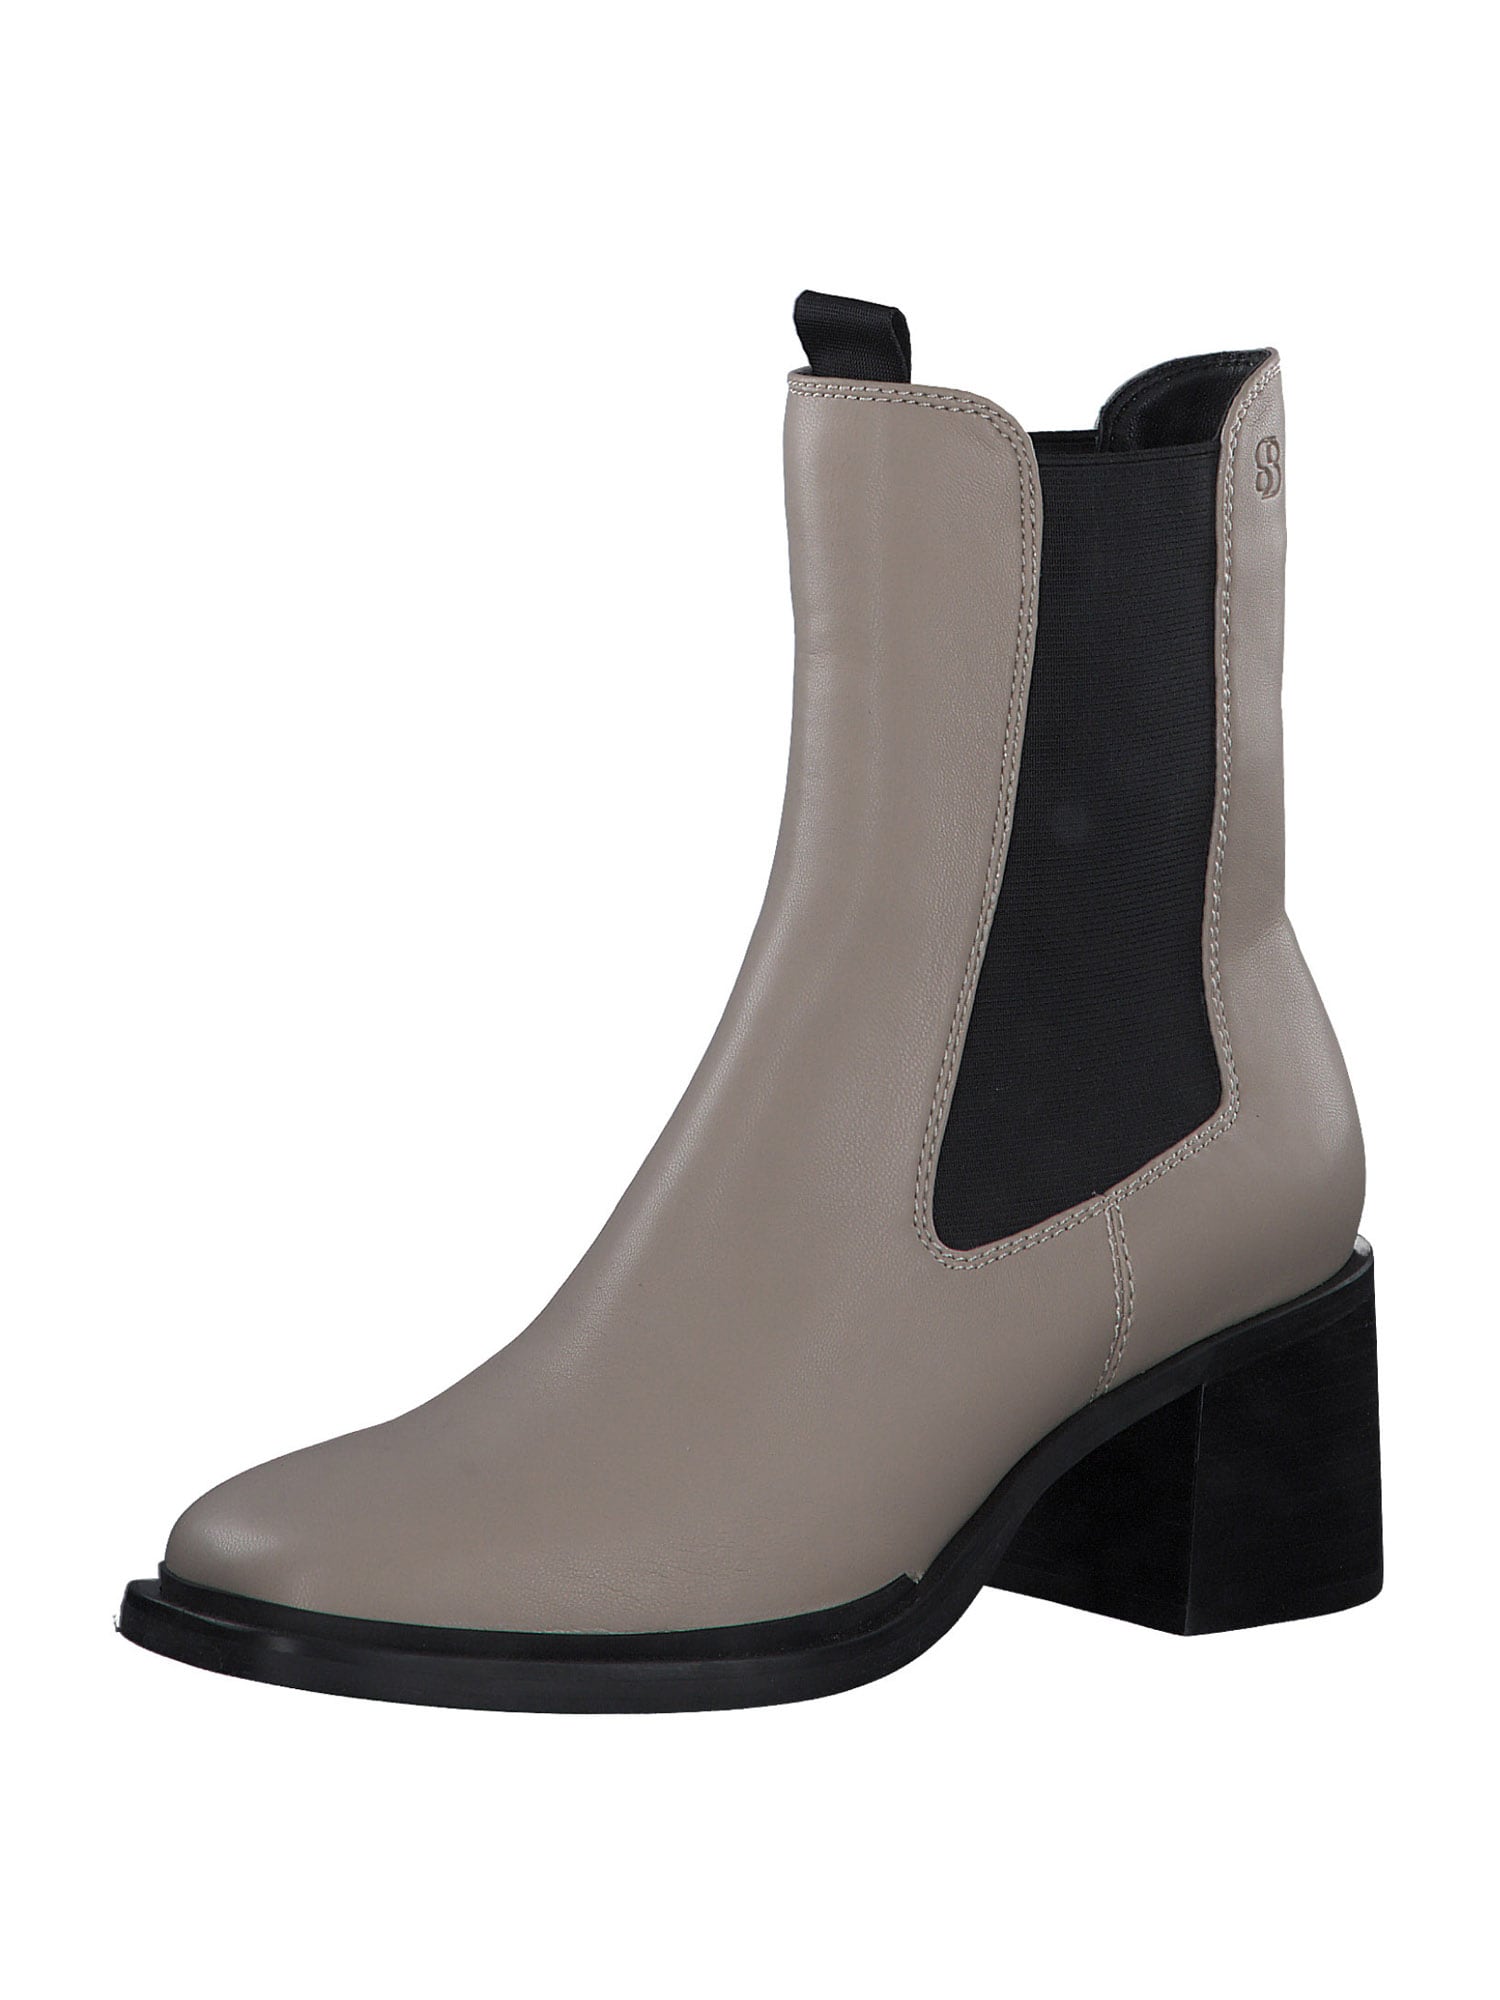 s.Oliver s.Oliver Chelsea Boots taupe